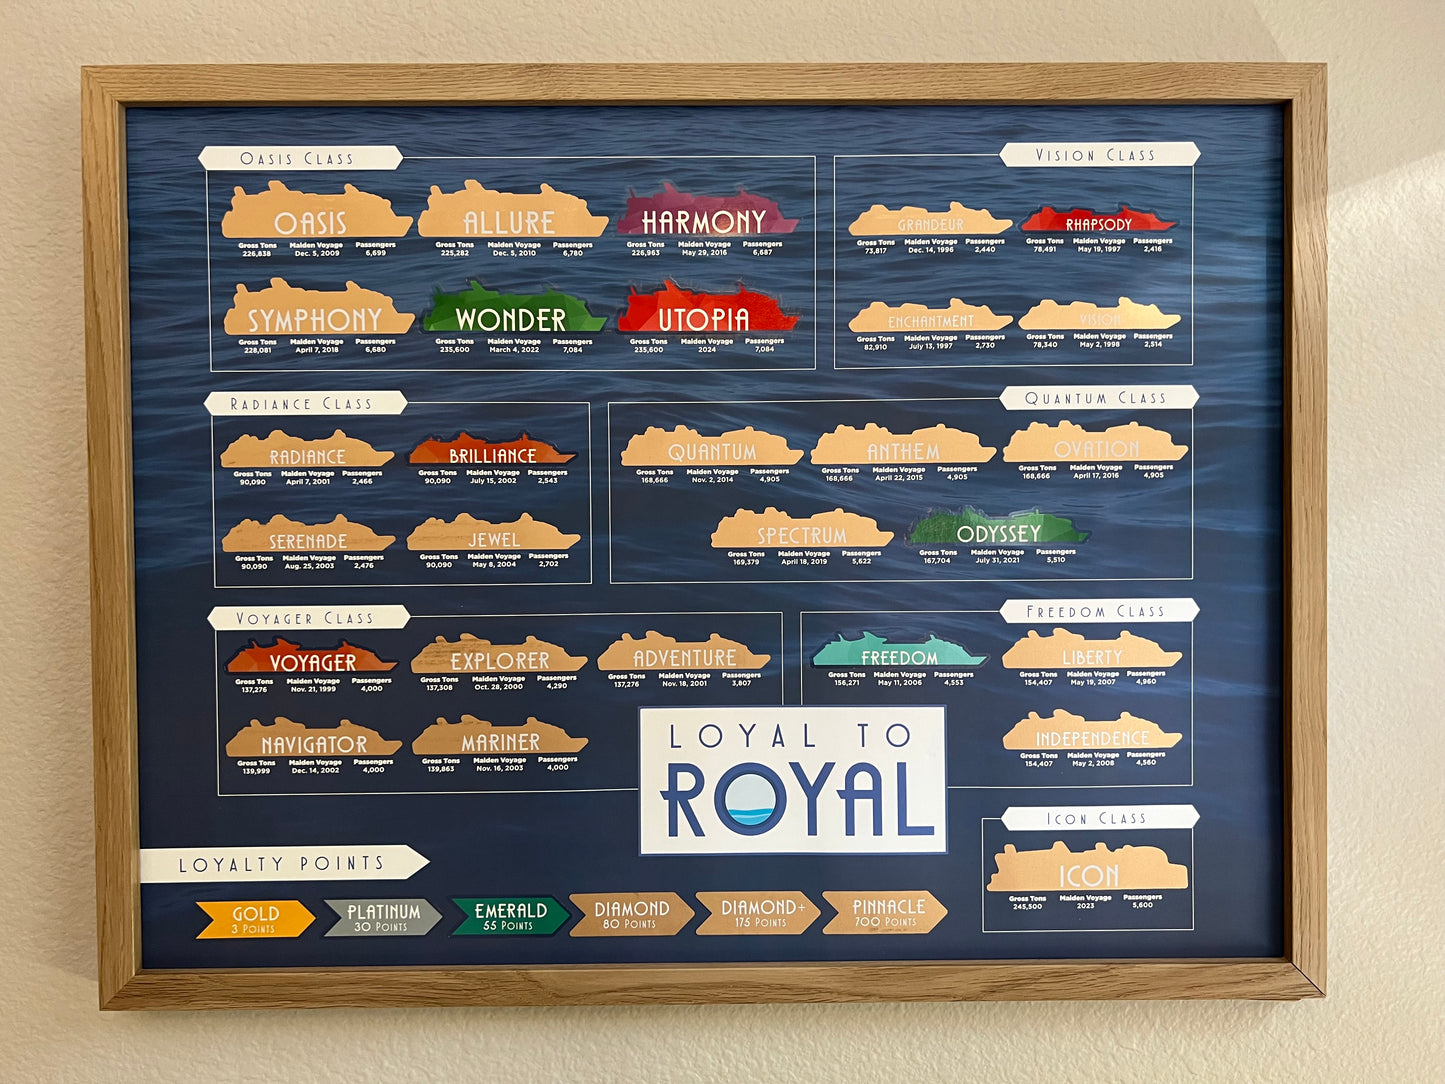 Royal Caribbean Scratch Off Poster